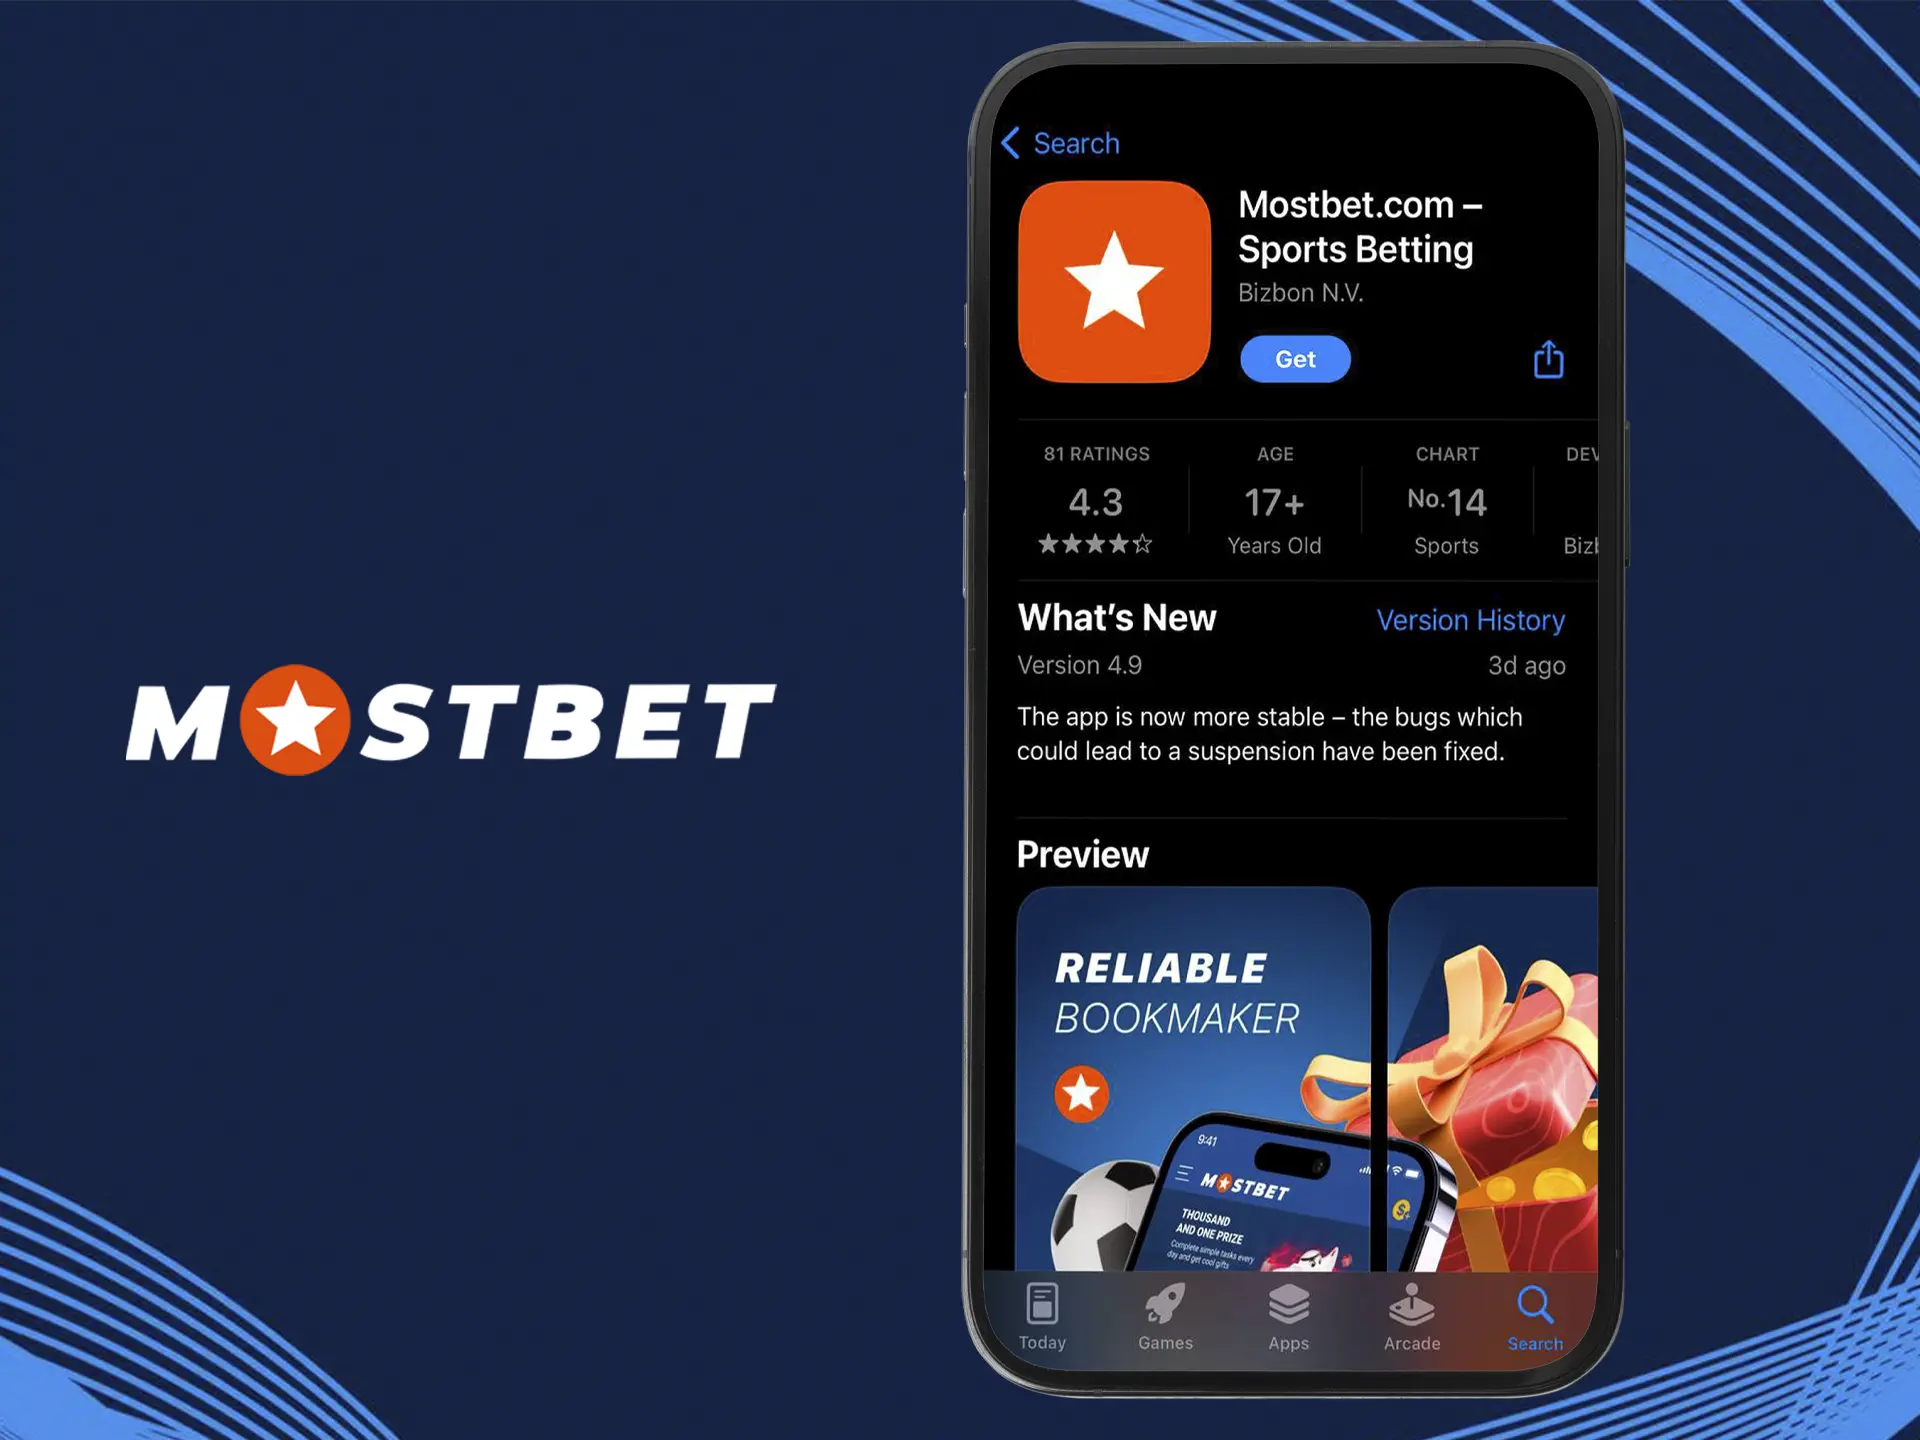 Install the Mostbet app and start playing the best slots.